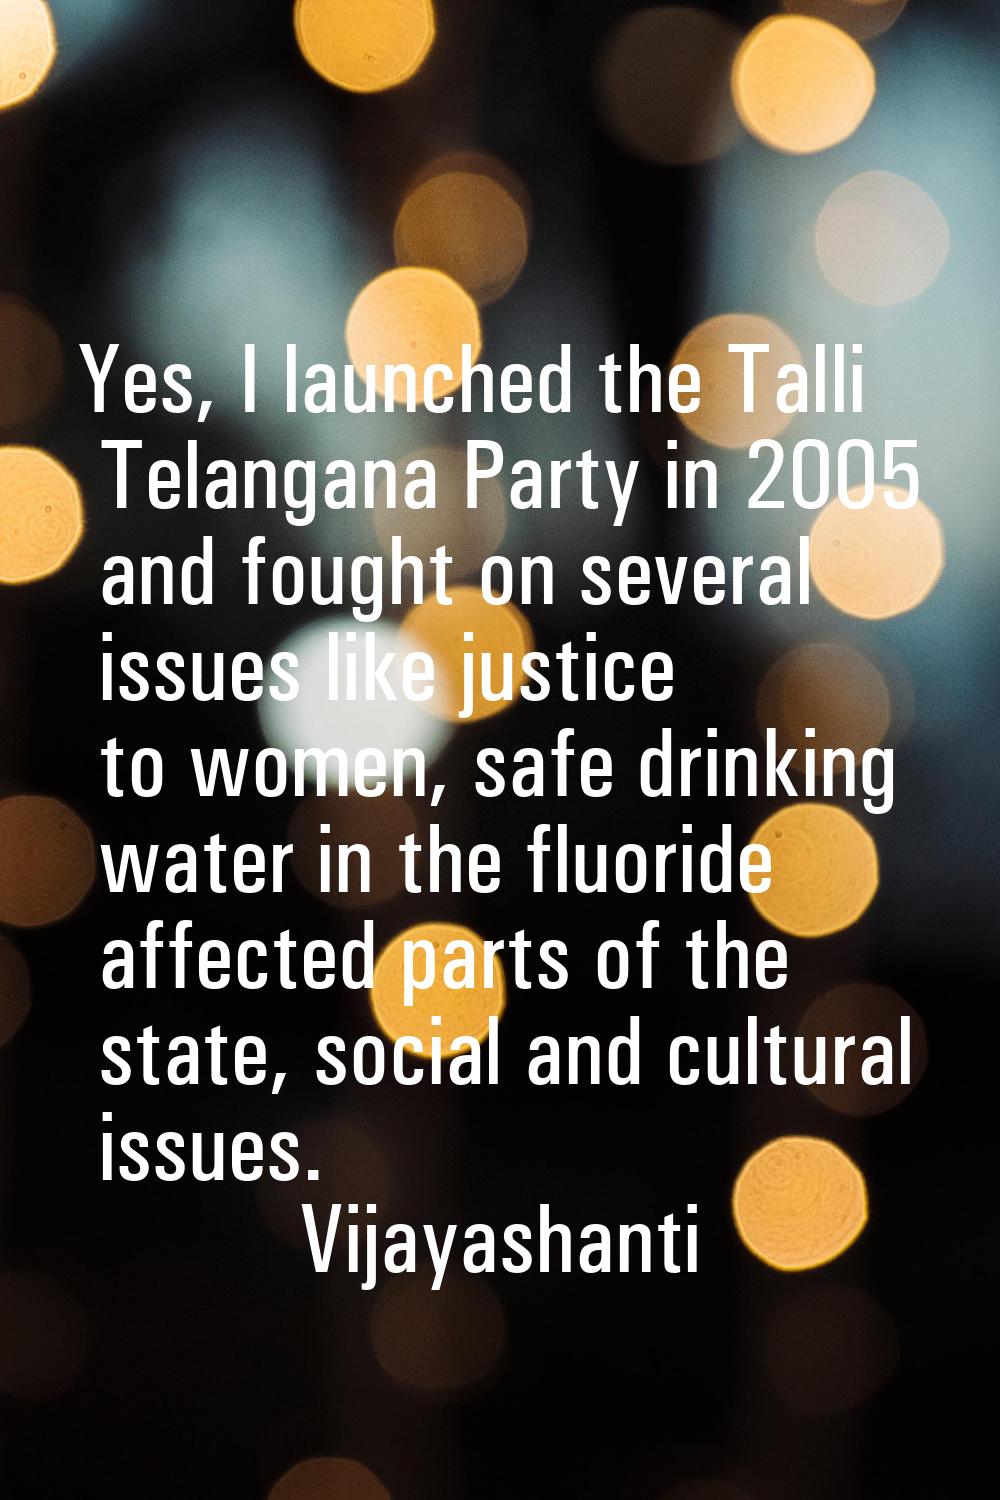 Yes, I launched the Talli Telangana Party in 2005 and fought on several issues like justice to wome